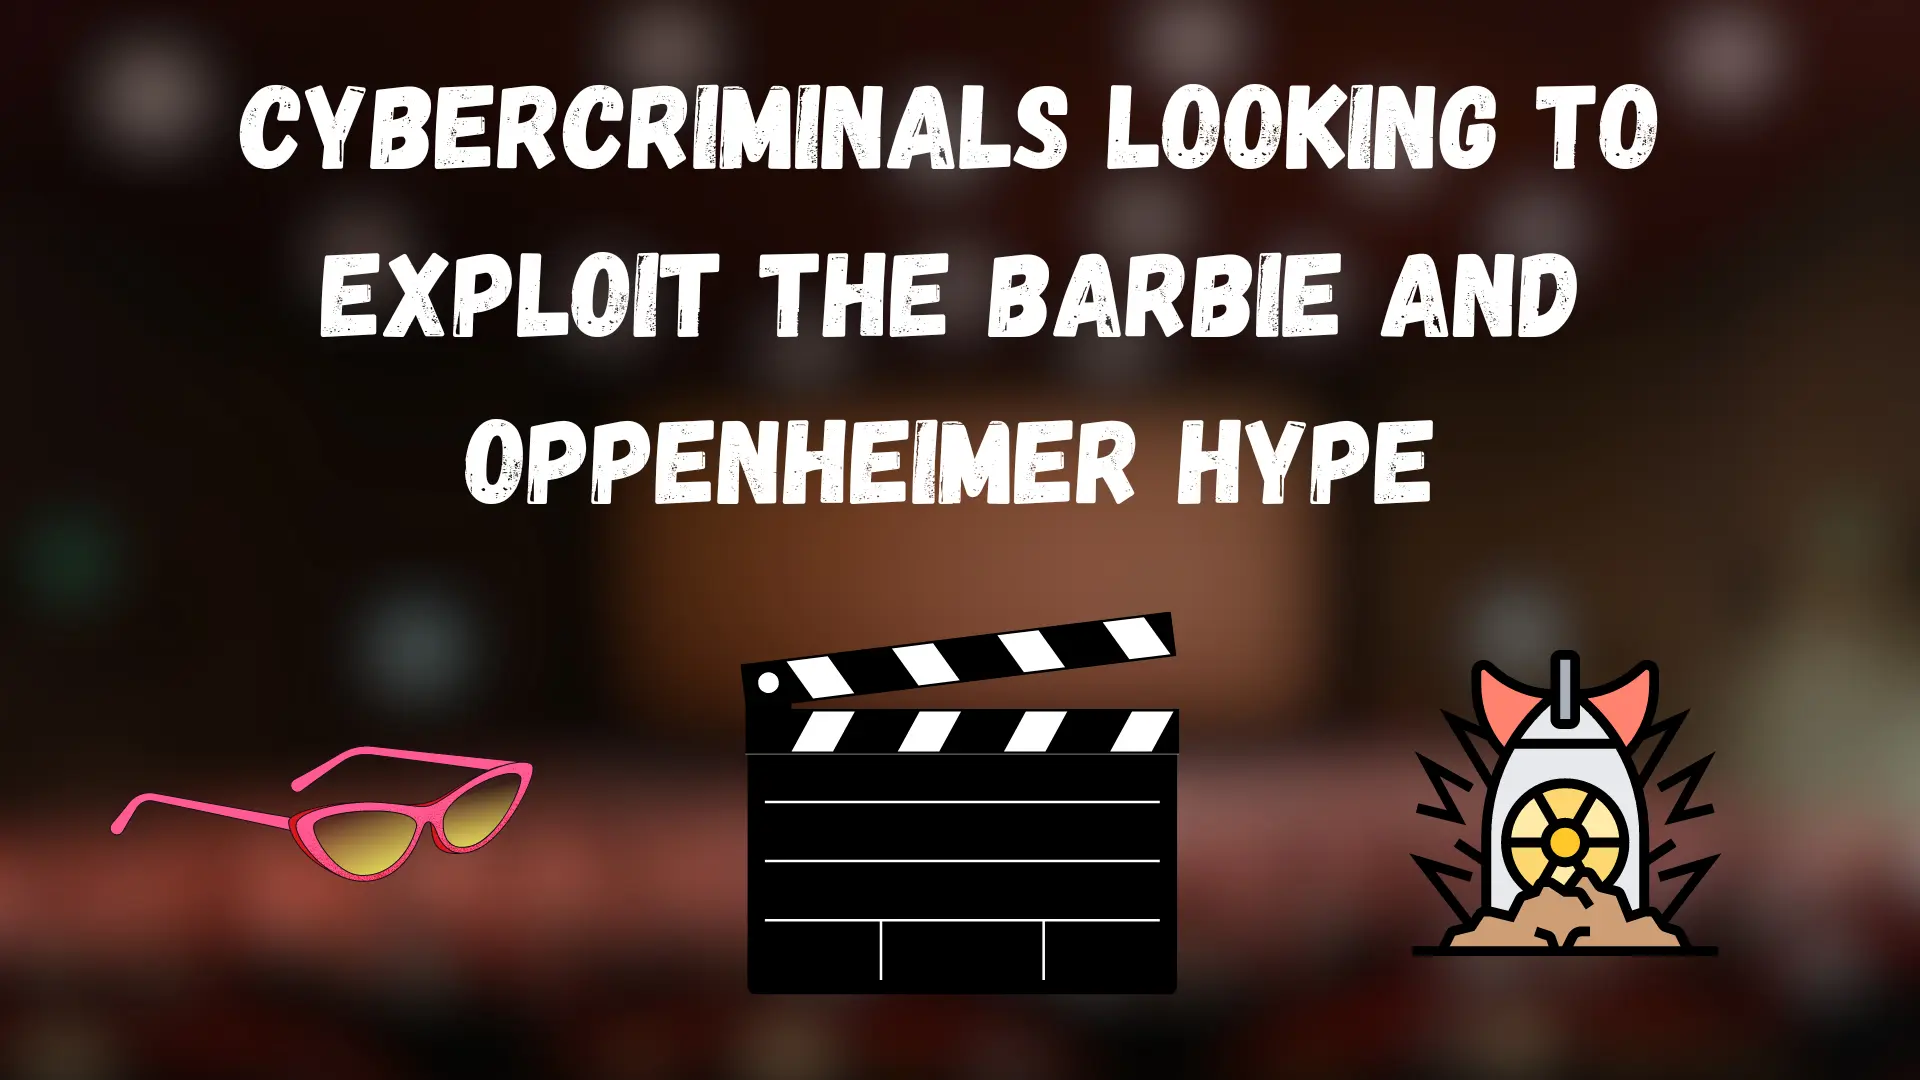 Cybercriminals Looking to Exploit the Barbie and Oppenheimer Hype